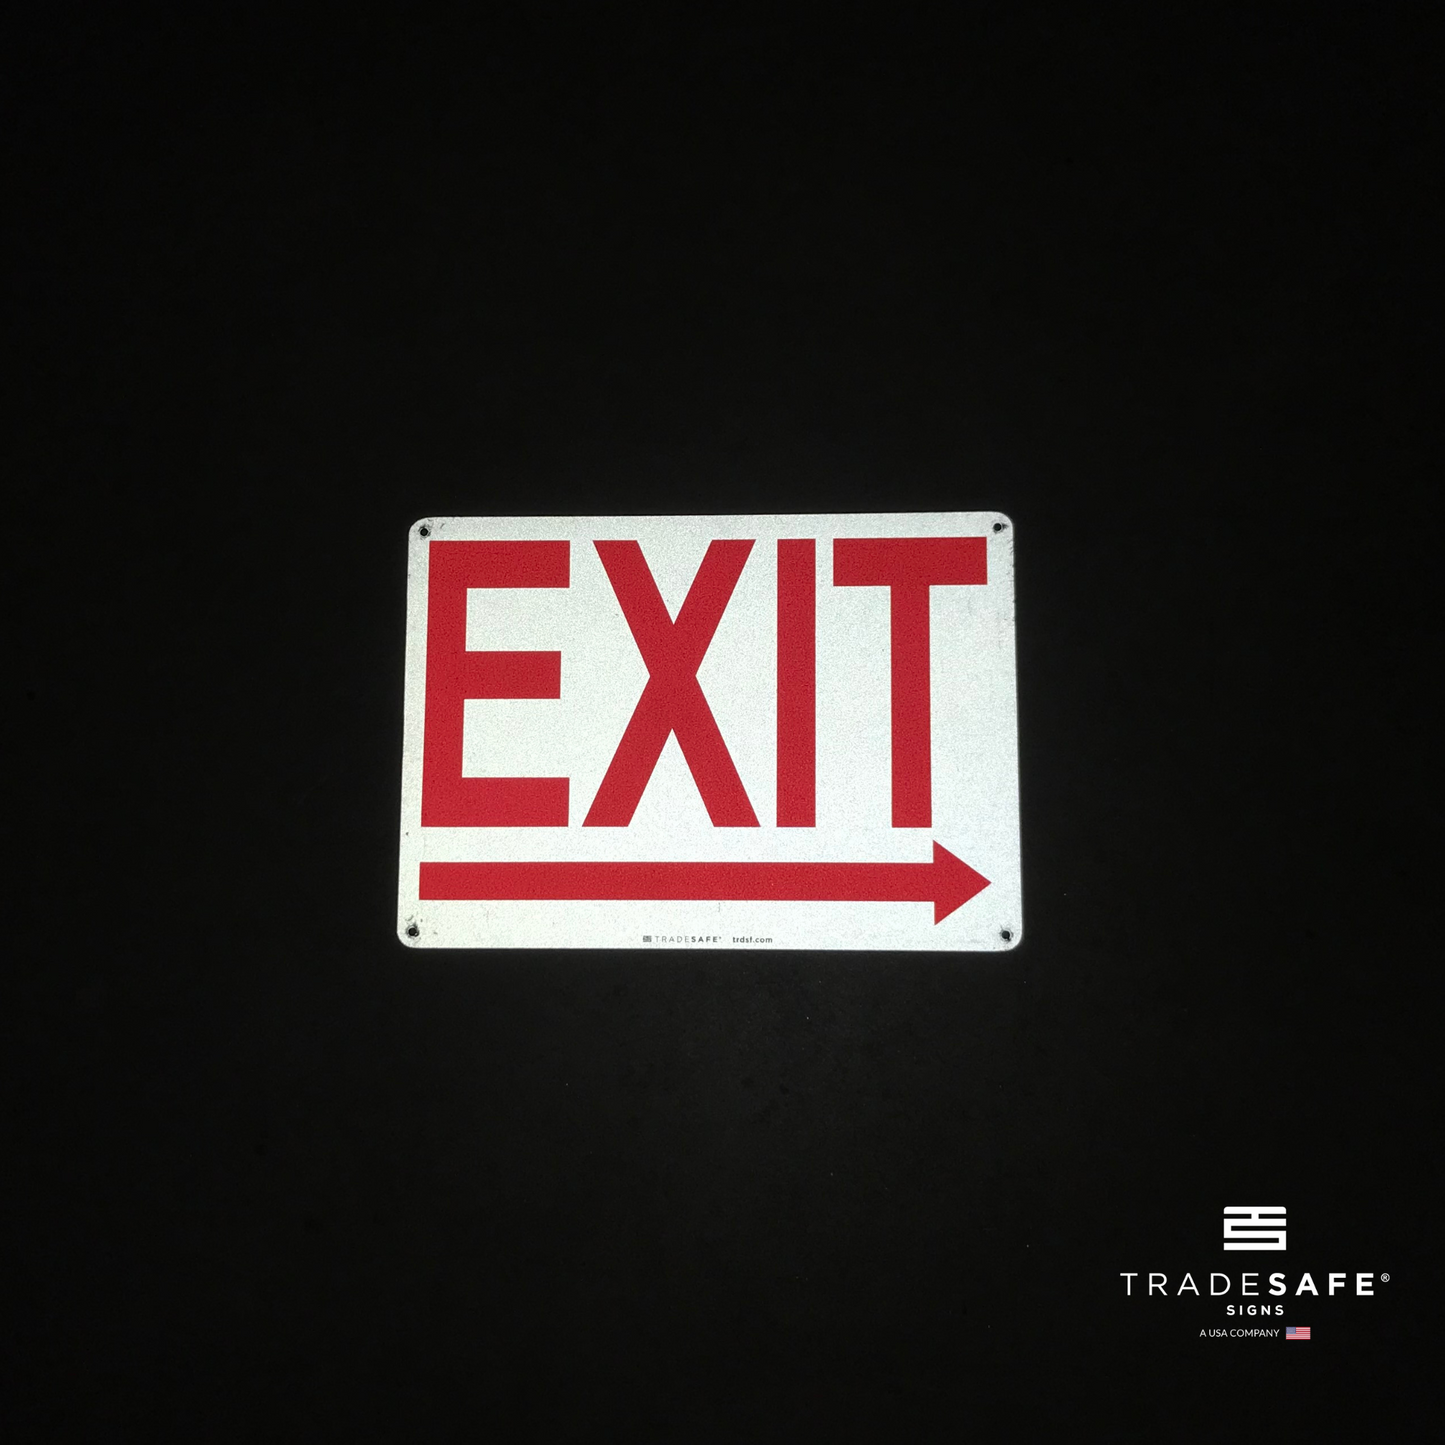 reflective attribute of exit sign with right arrow on black background